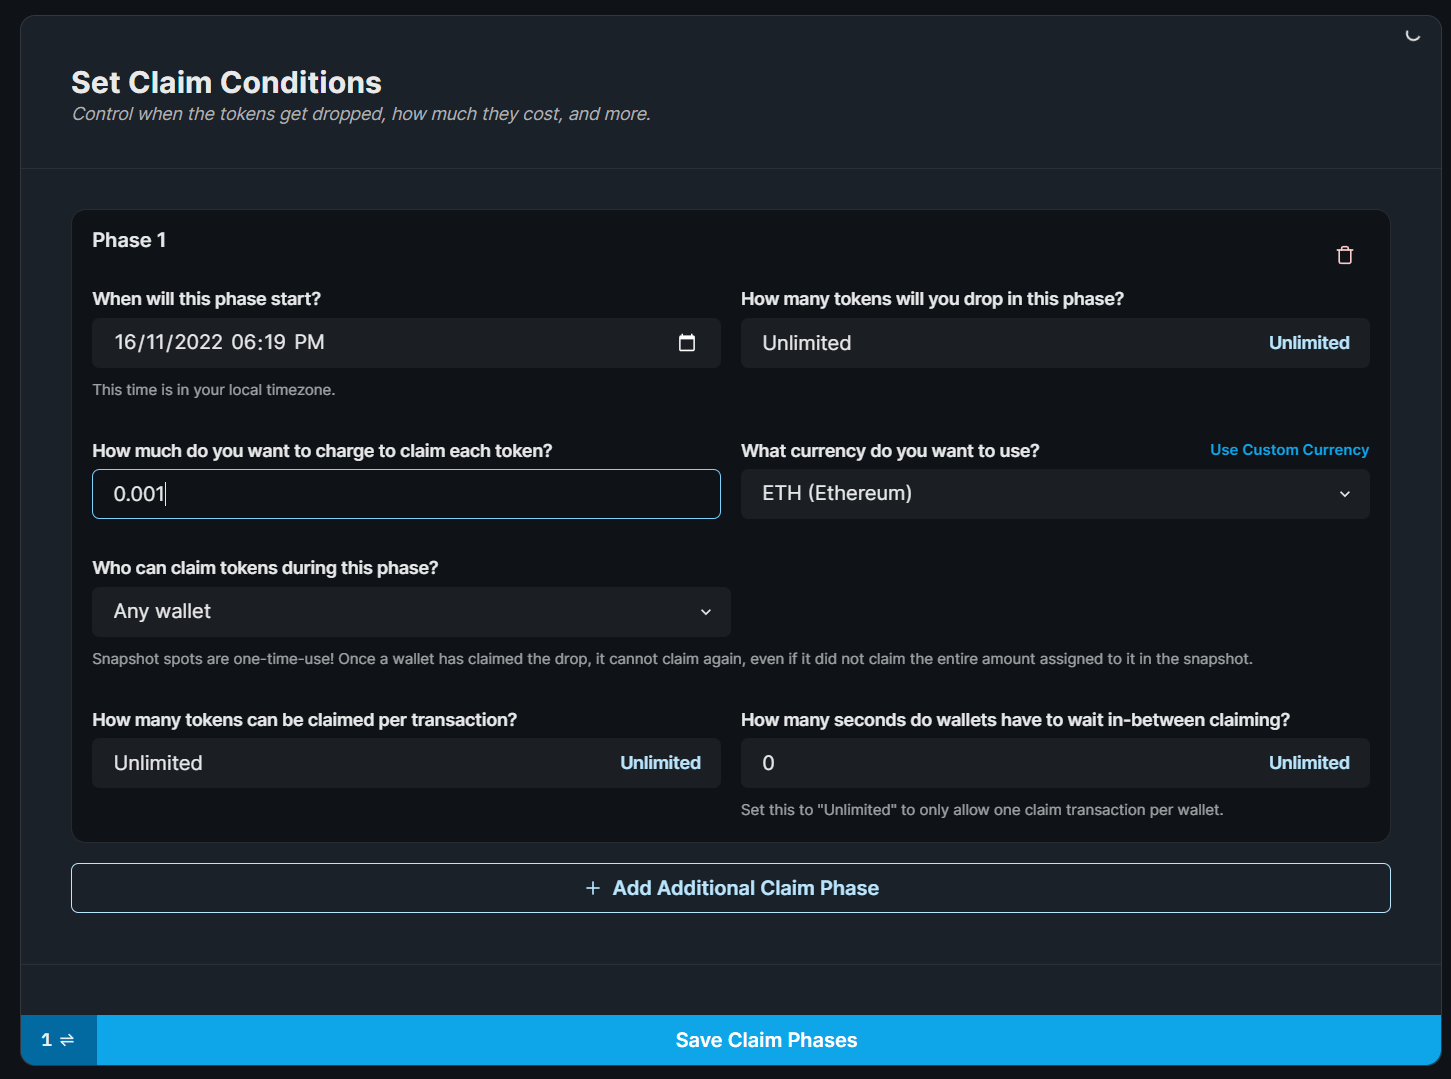 Configure and save claim phase